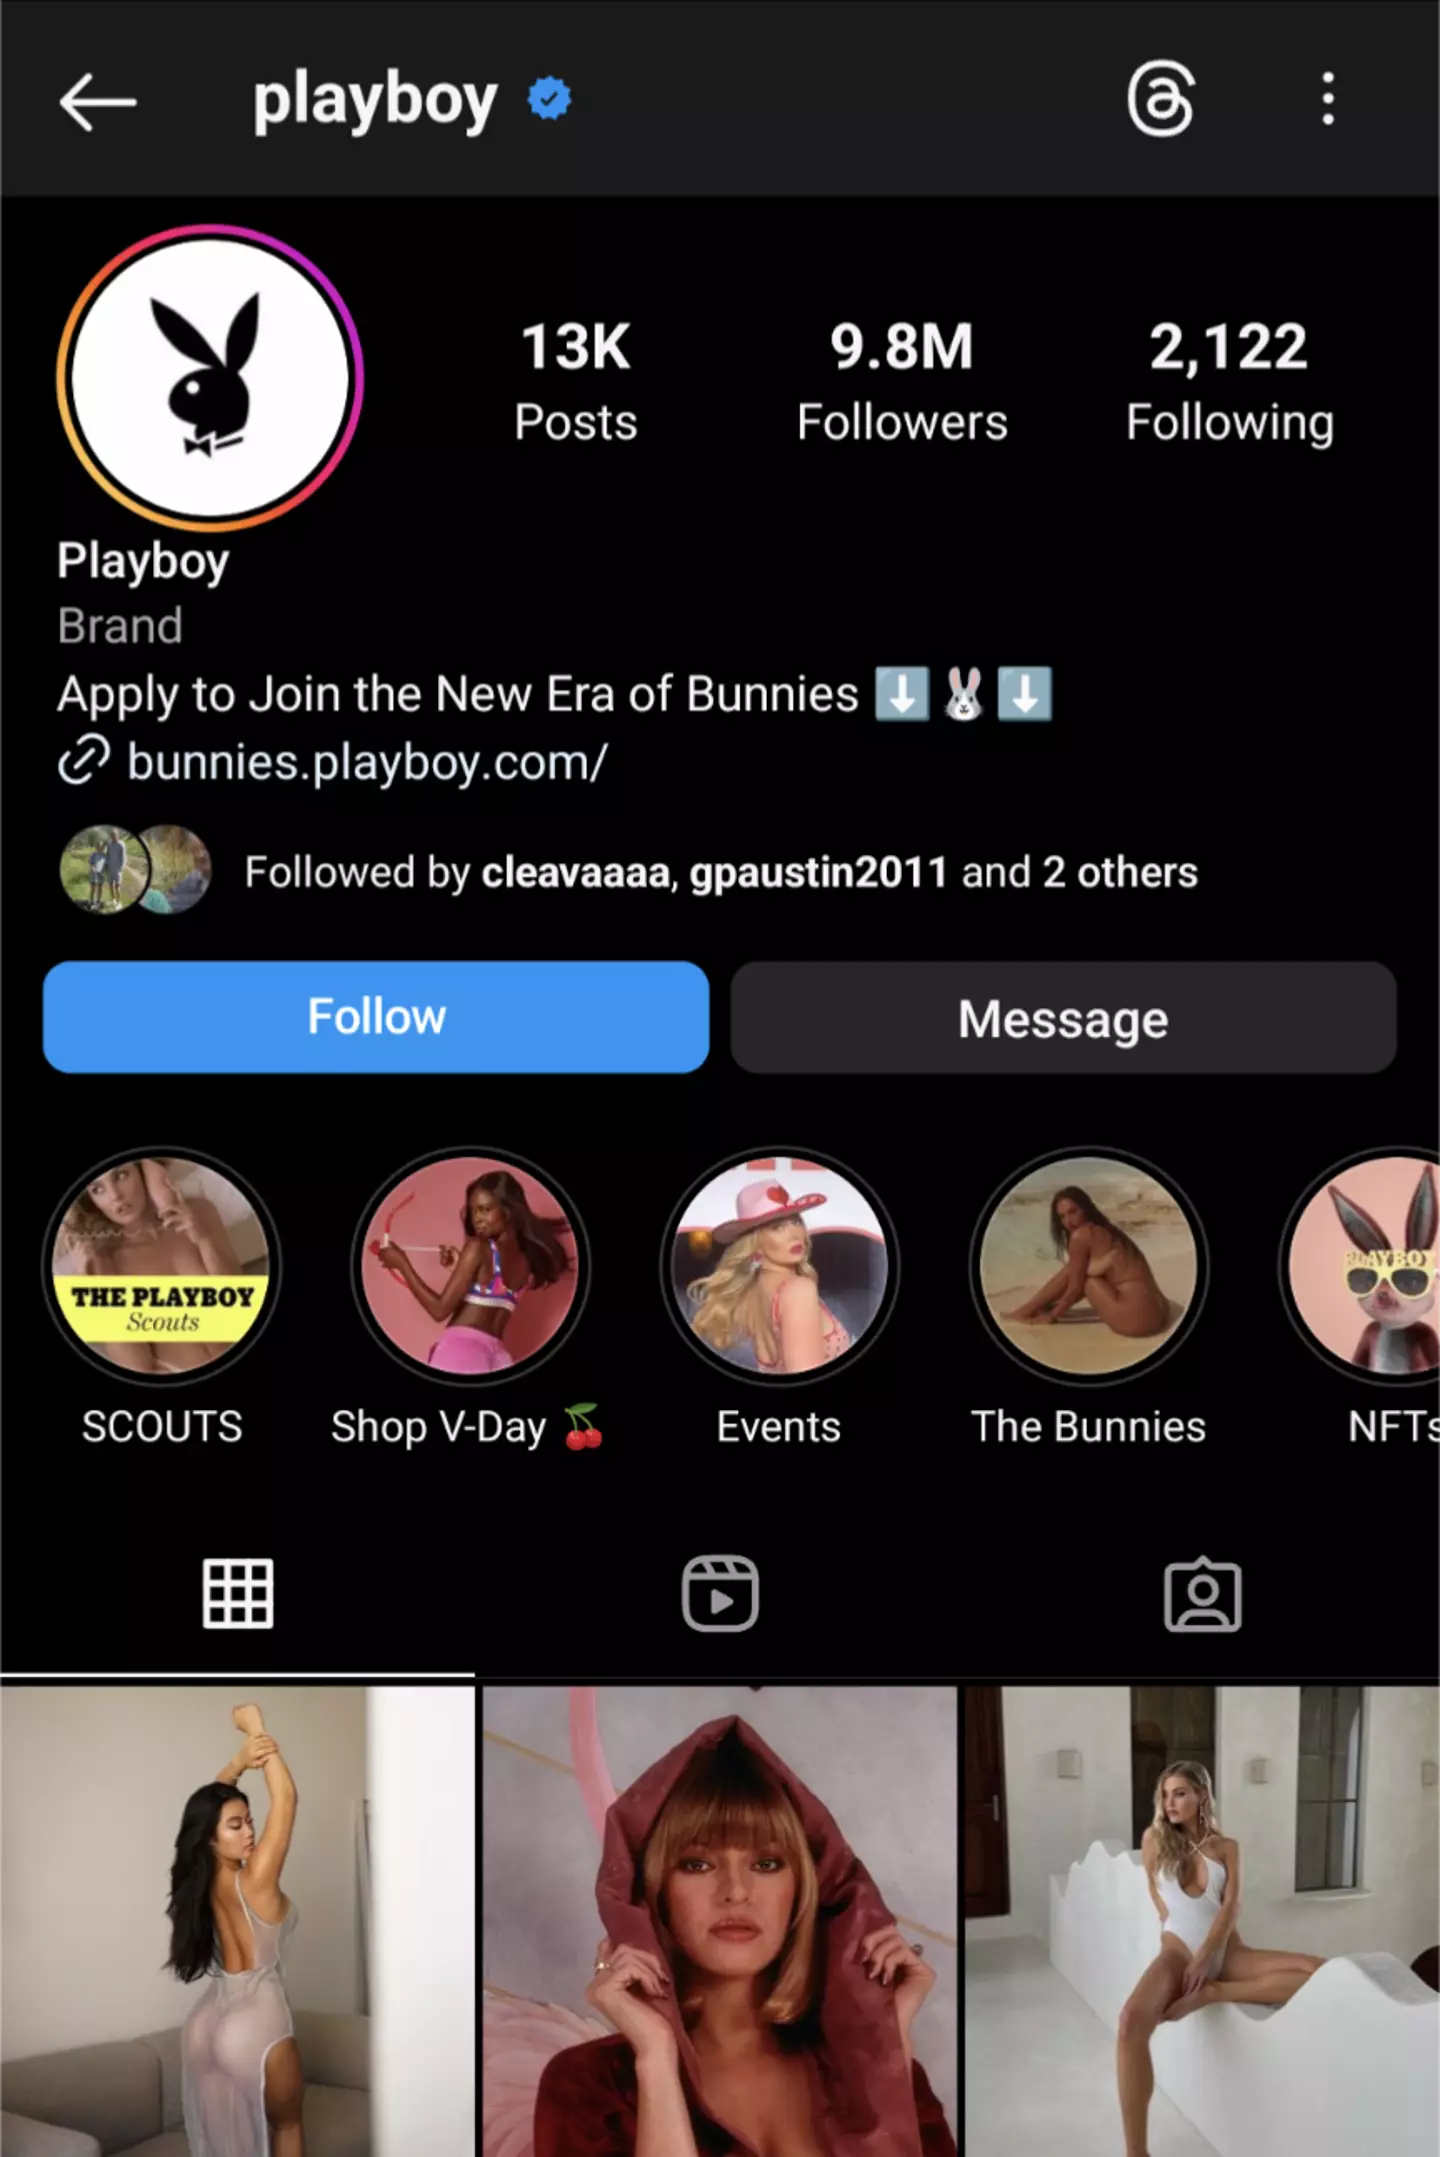 Playboy is recruiting new influencers to join their platform.